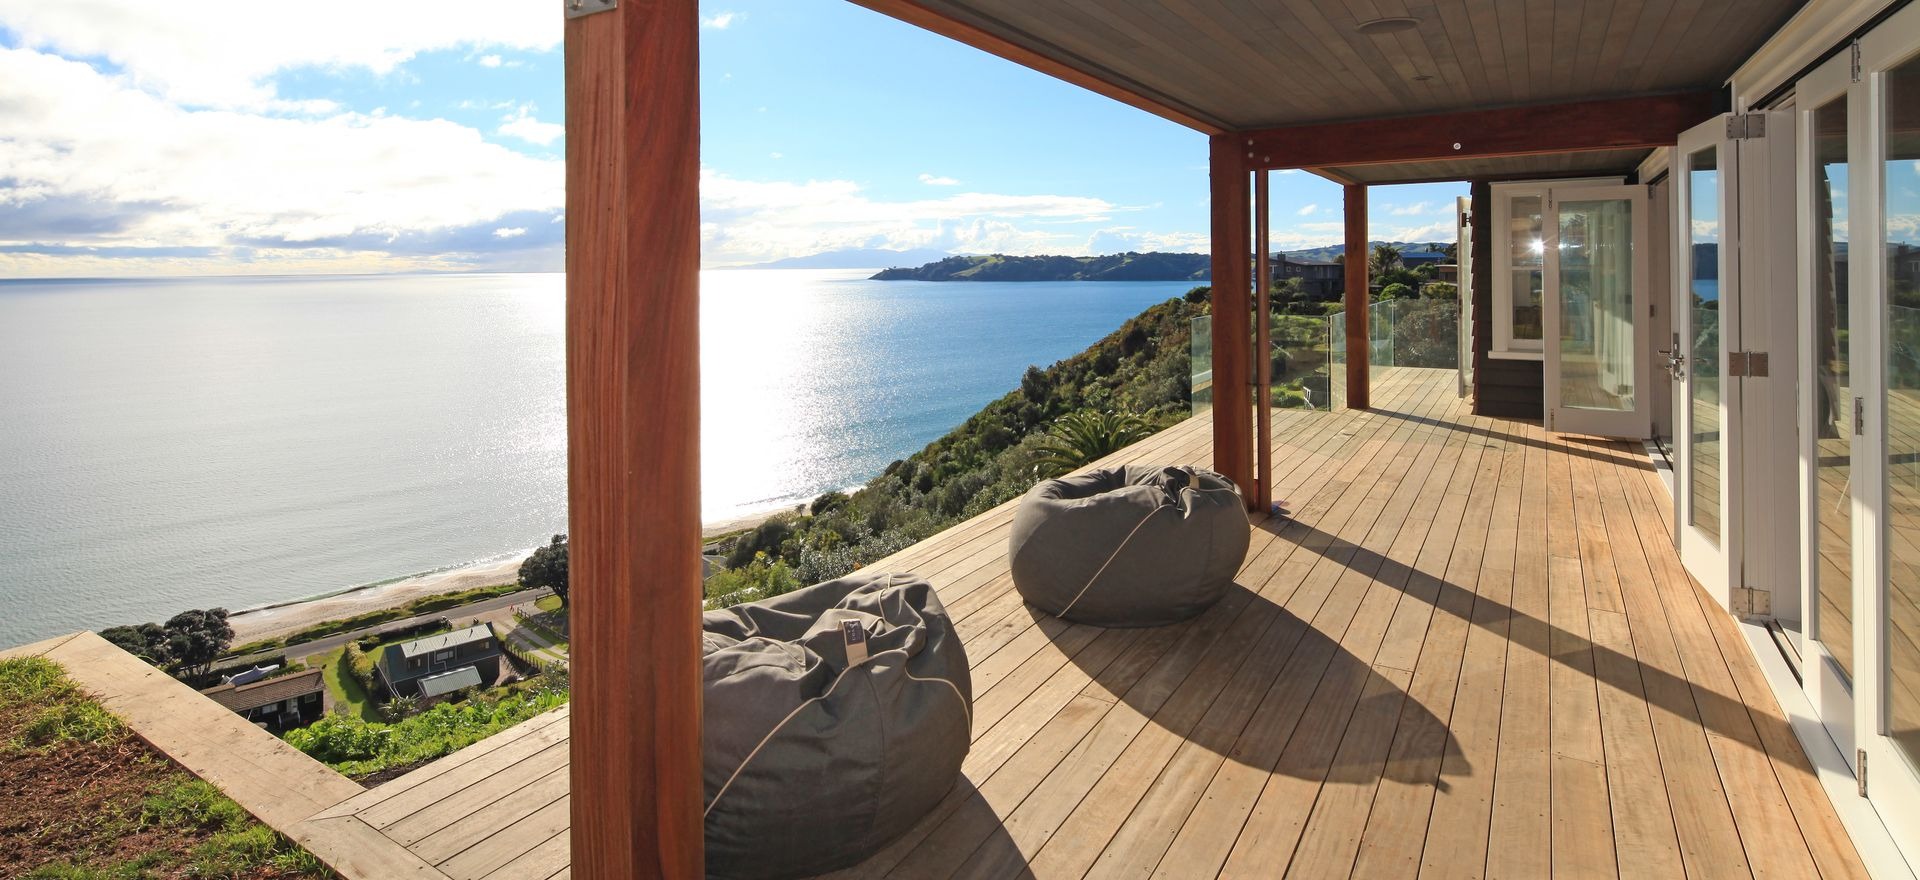 13 timber decking options: which is best for your home?